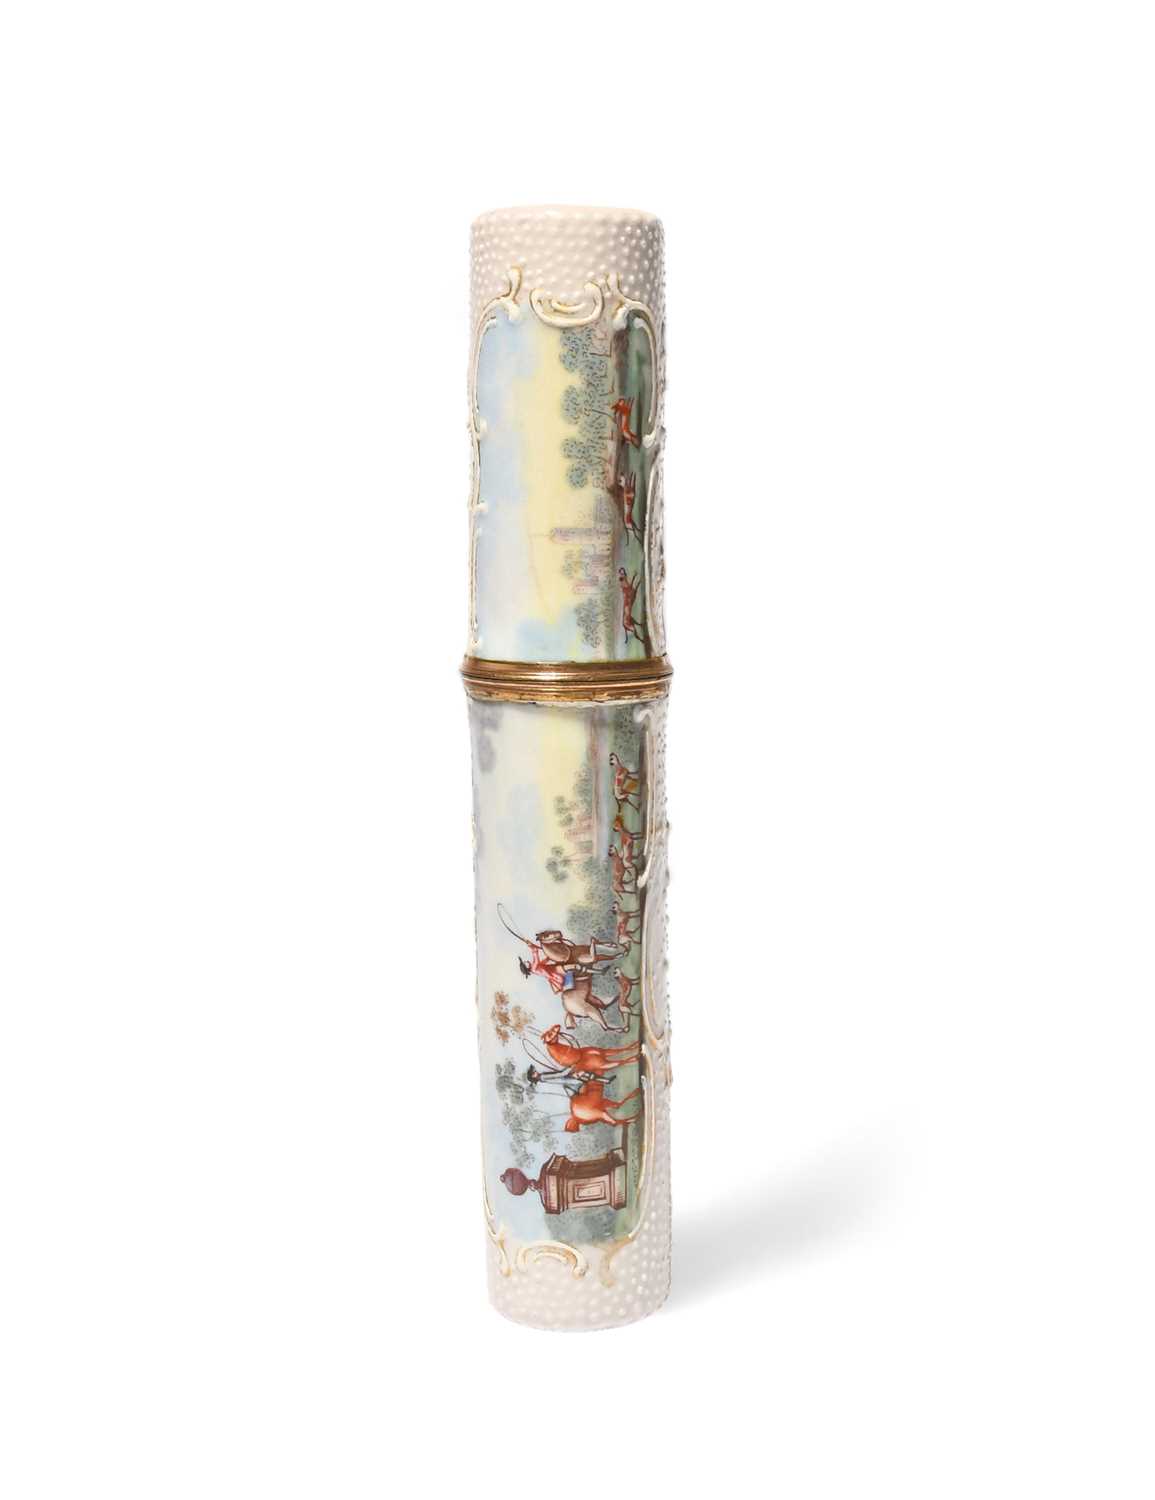 A good South Staffordshire enamel etui or bodkin case, c.1770, the cylindrical body painted with